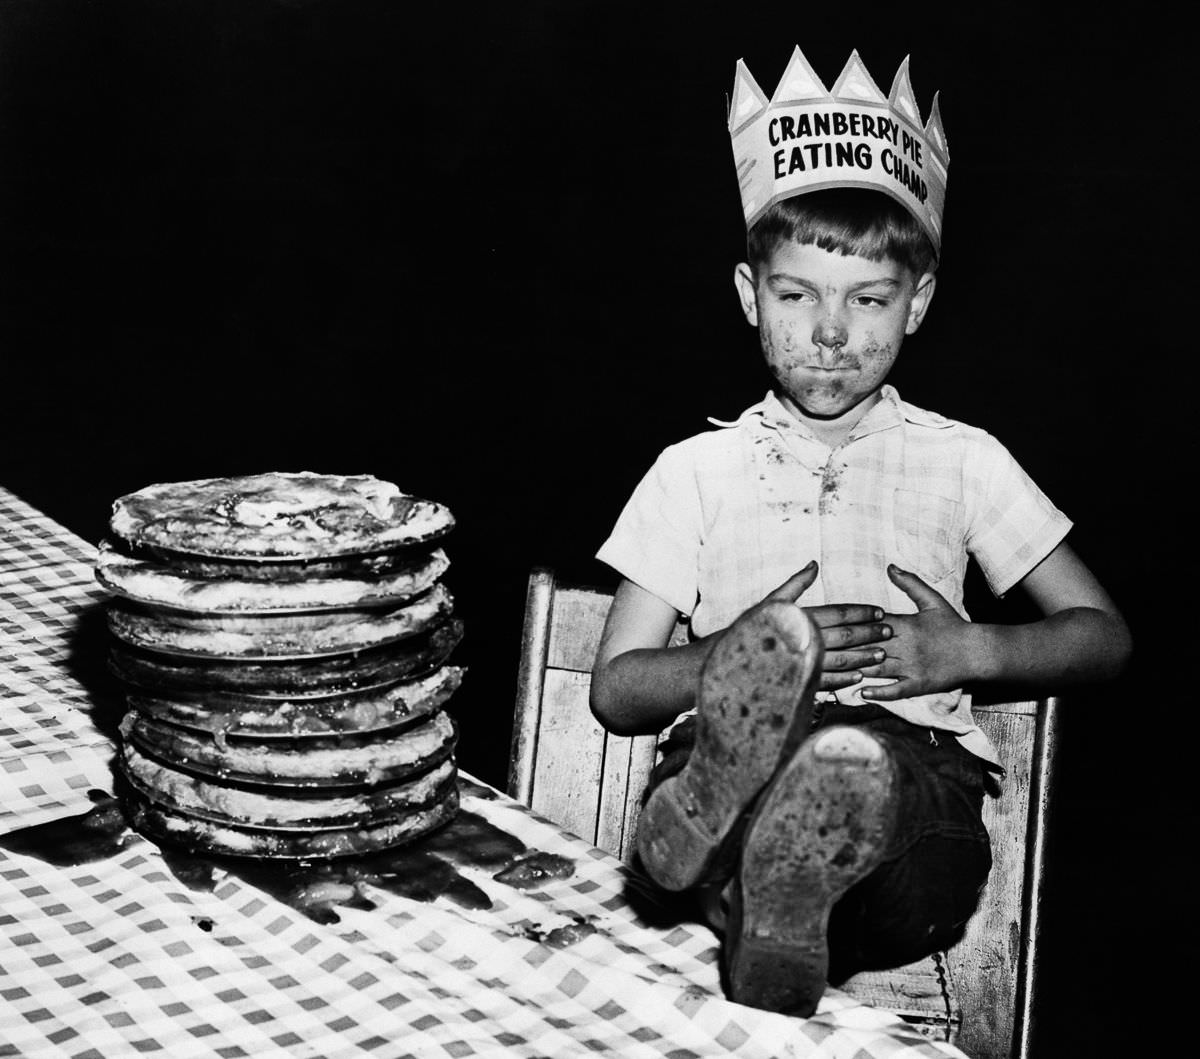 Richard Baranski, 6, savors his victory after eating a 10-inch cranberry pie in 15 seconds, 1948.